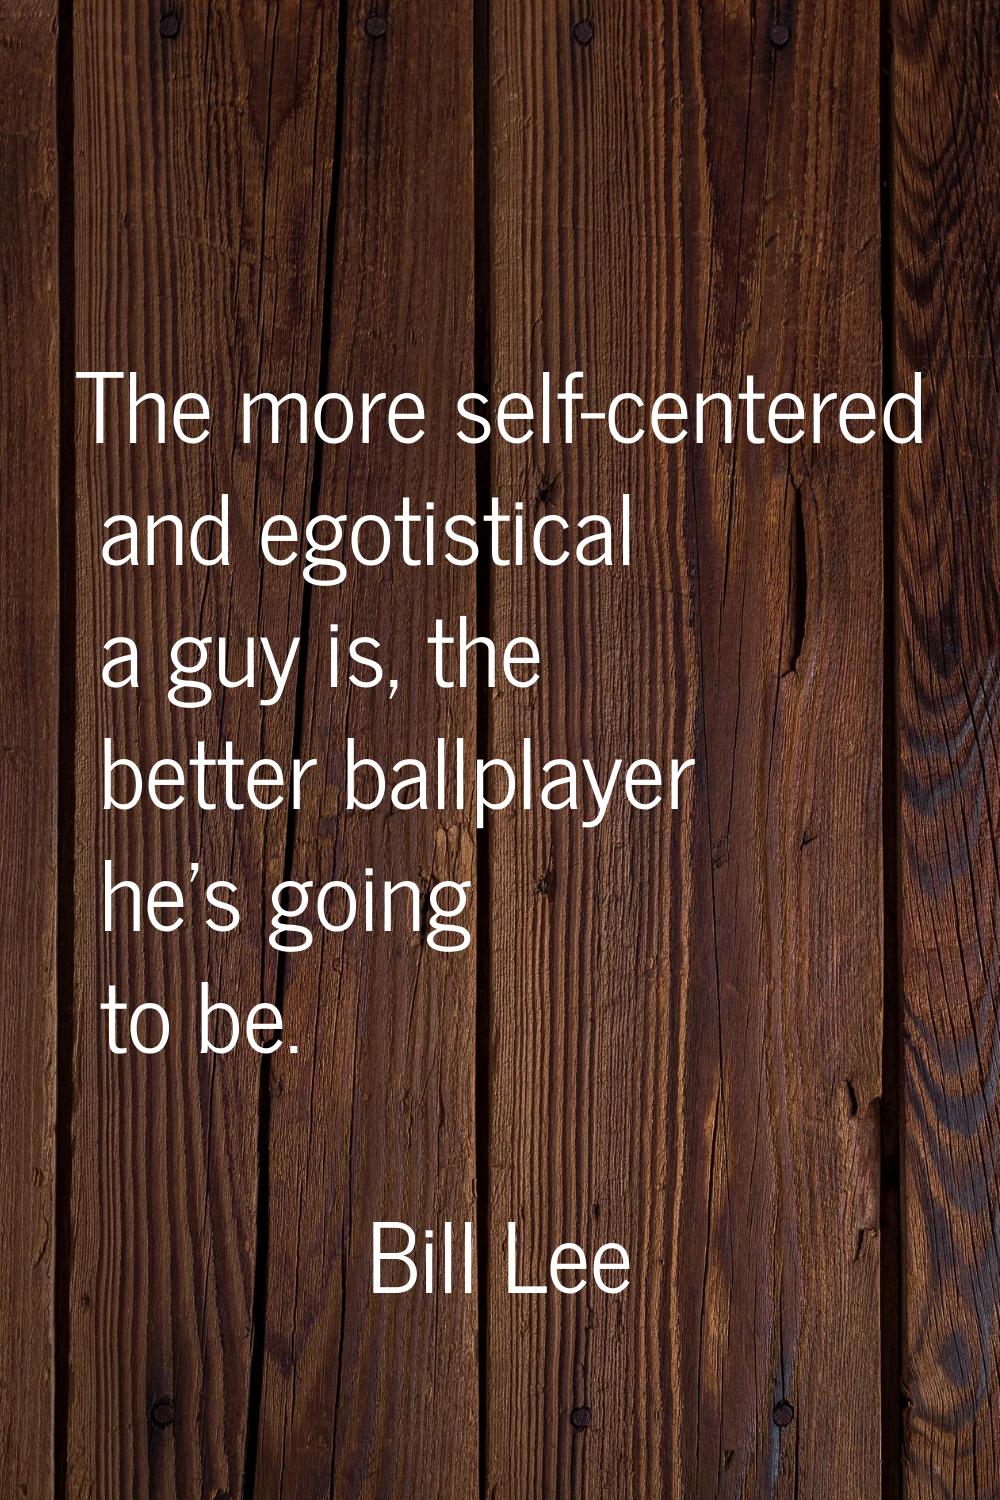 The more self-centered and egotistical a guy is, the better ballplayer he's going to be.